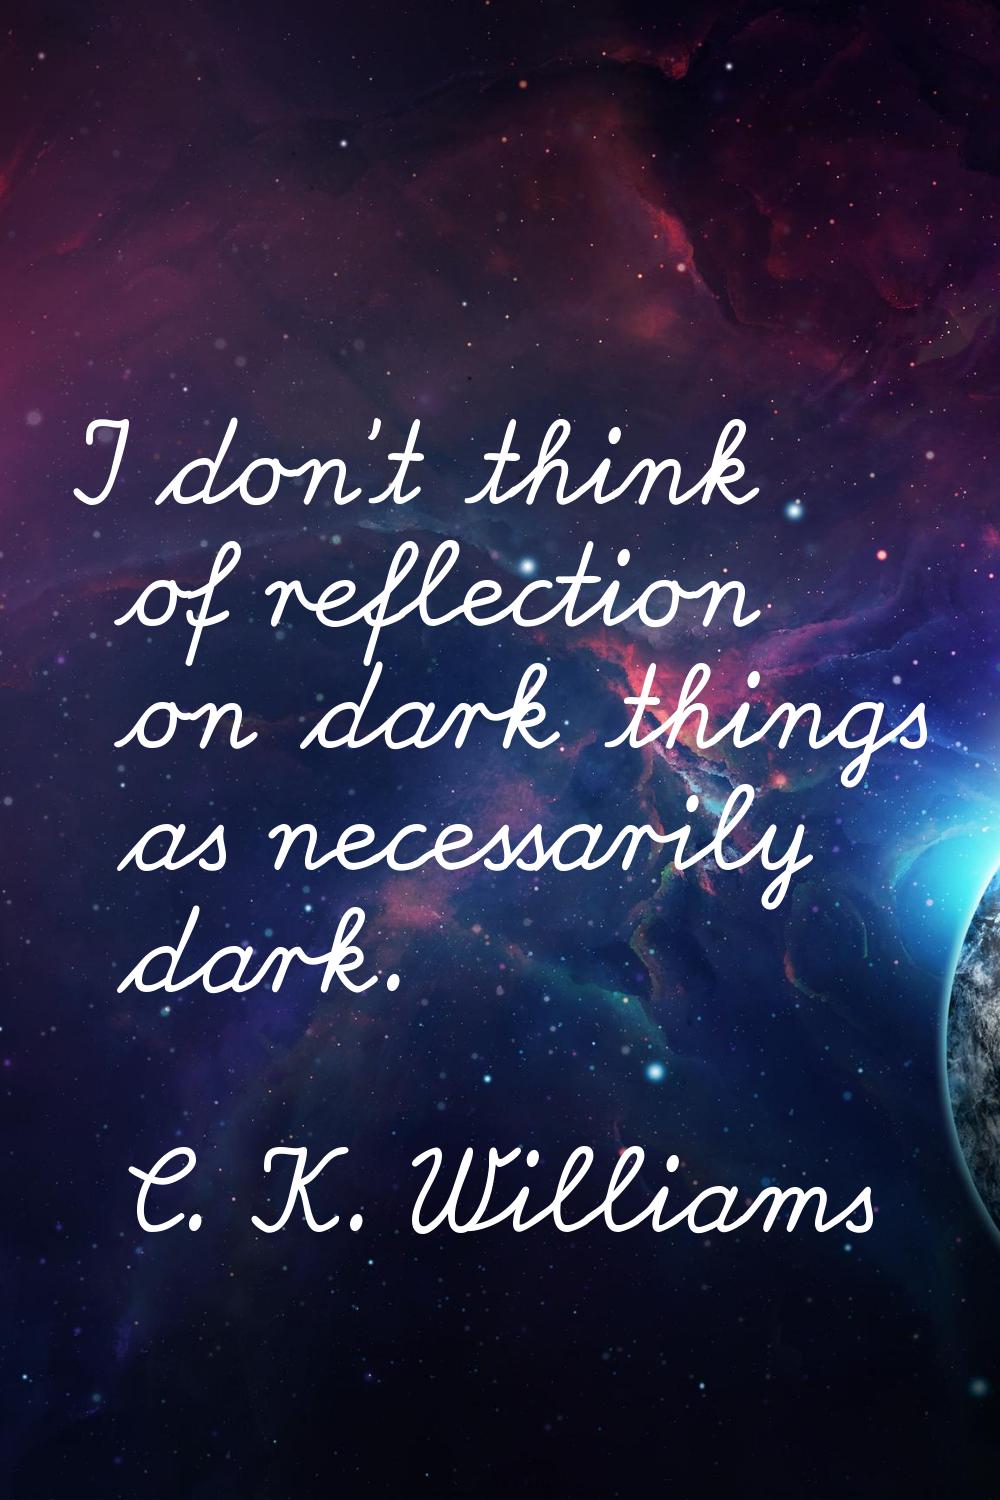 I don't think of reflection on dark things as necessarily dark.